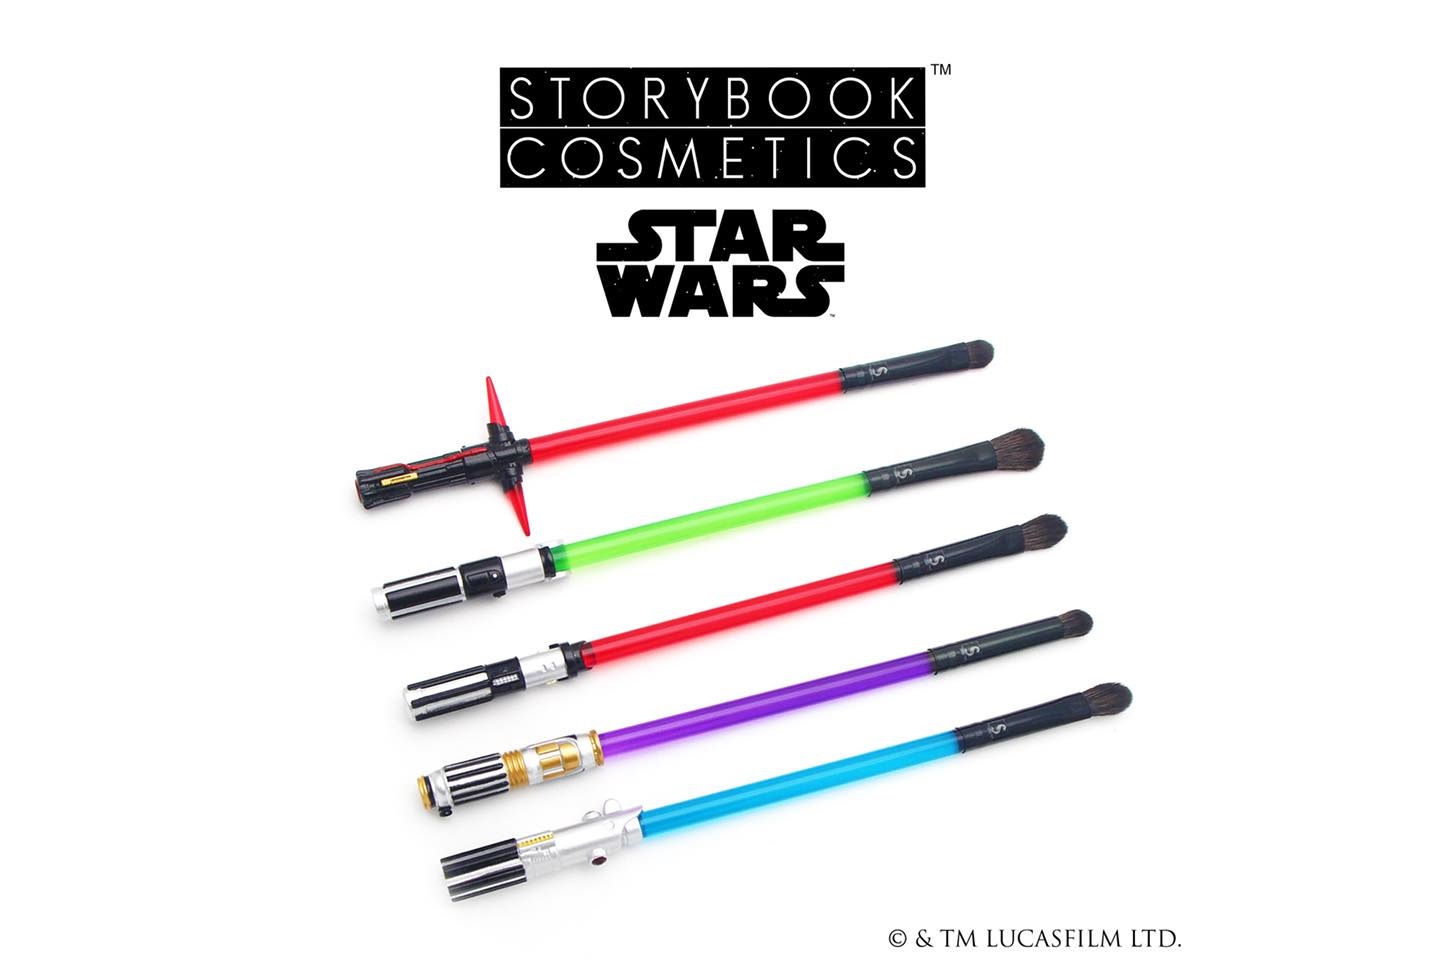 Storybook Cosmetics x Star Wars Lightsaber makeup brushes coming soon